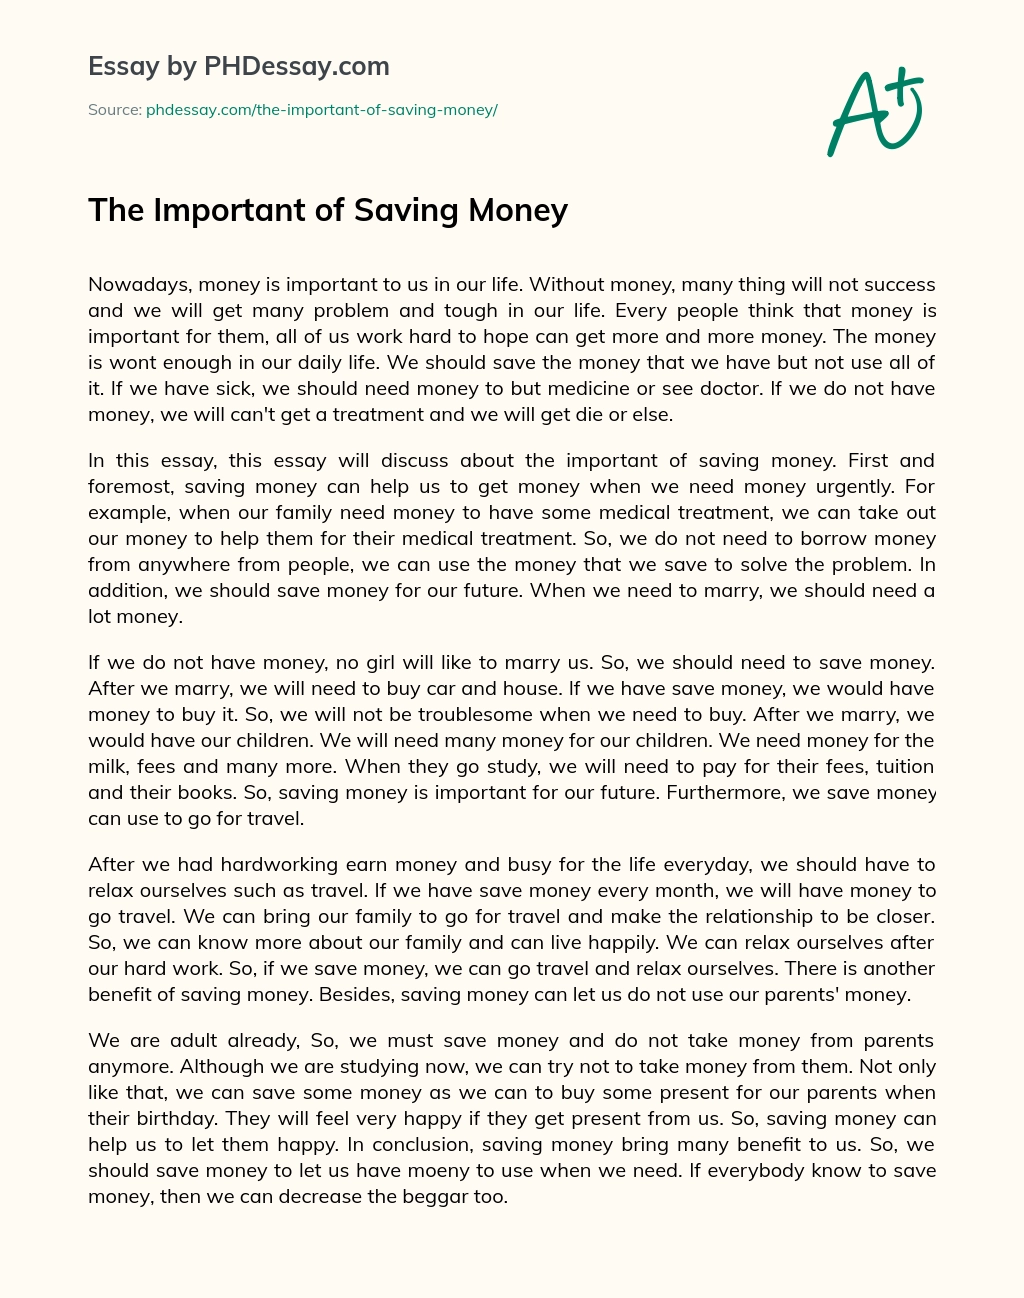 how to save money essay writing